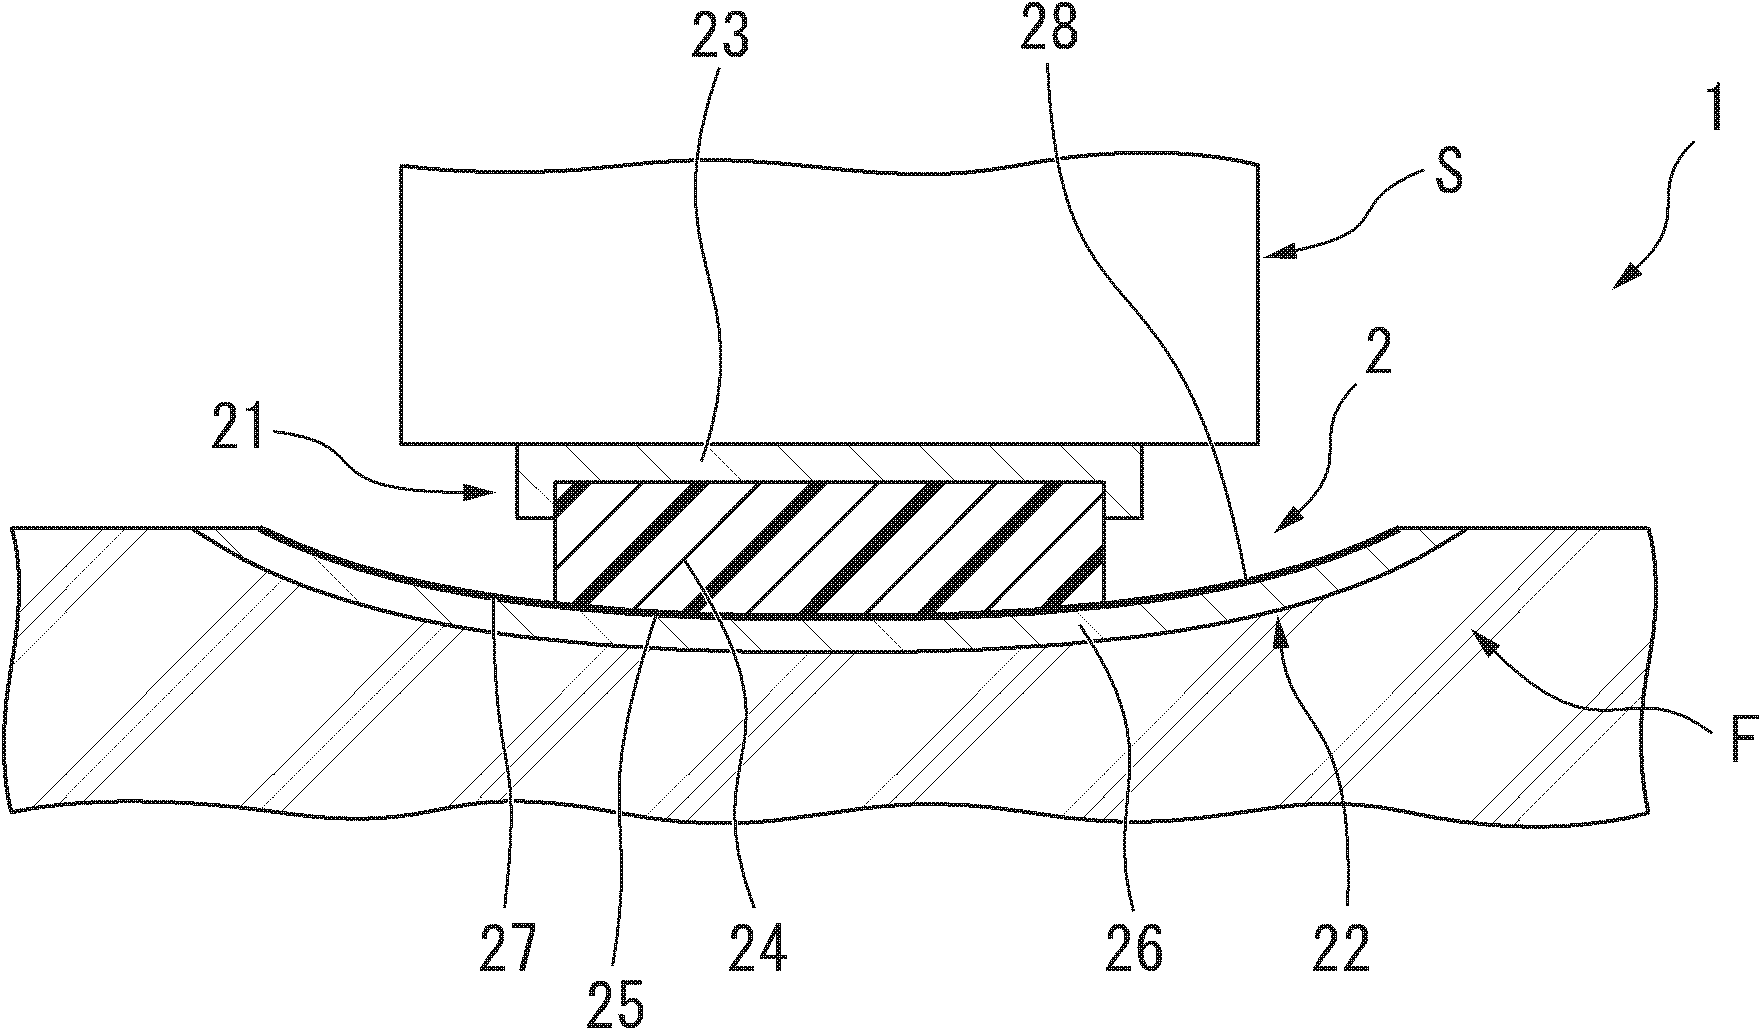 Slide structure, support structure and seismically isolated structure